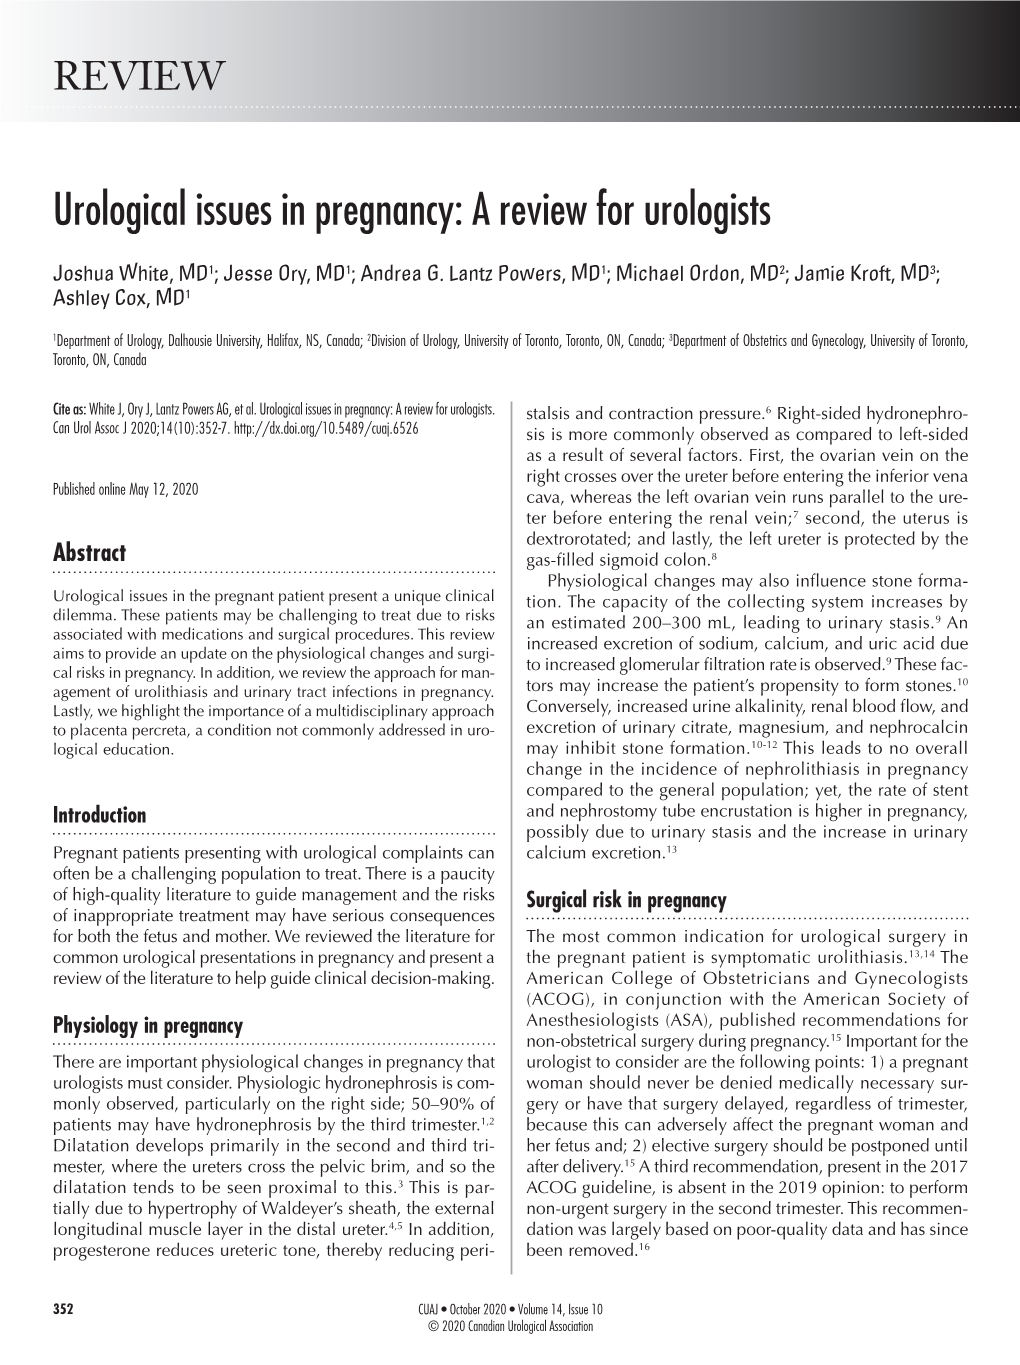 Urological Issues in Pregnancy: a Review for Urologists